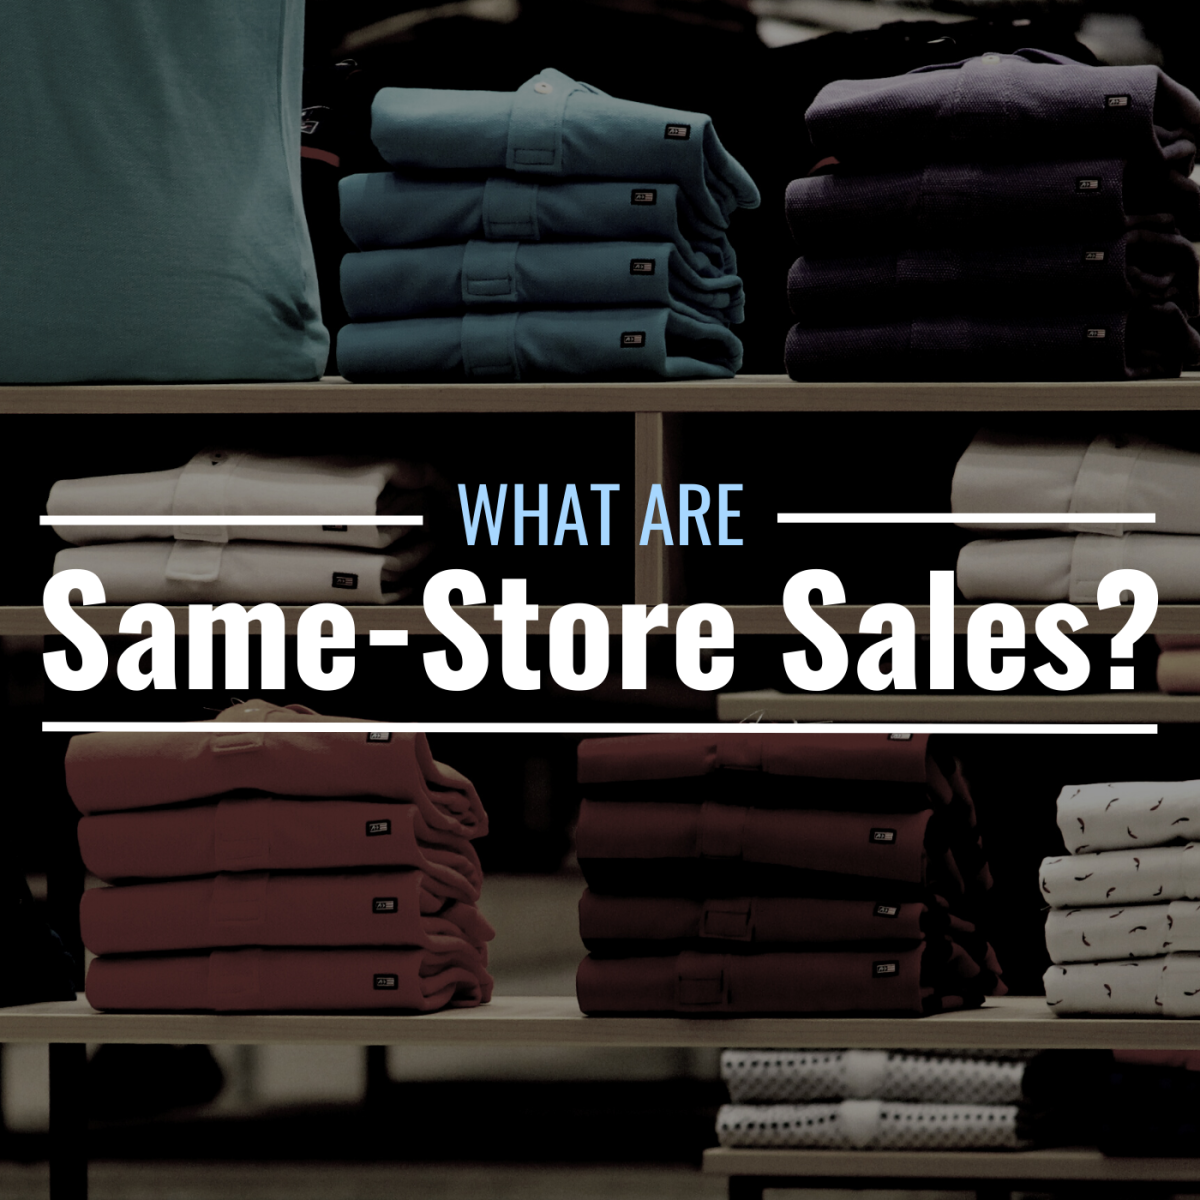 Photo of clothes on a rack with text overlay that reads "What Are Same-Store Sales?"